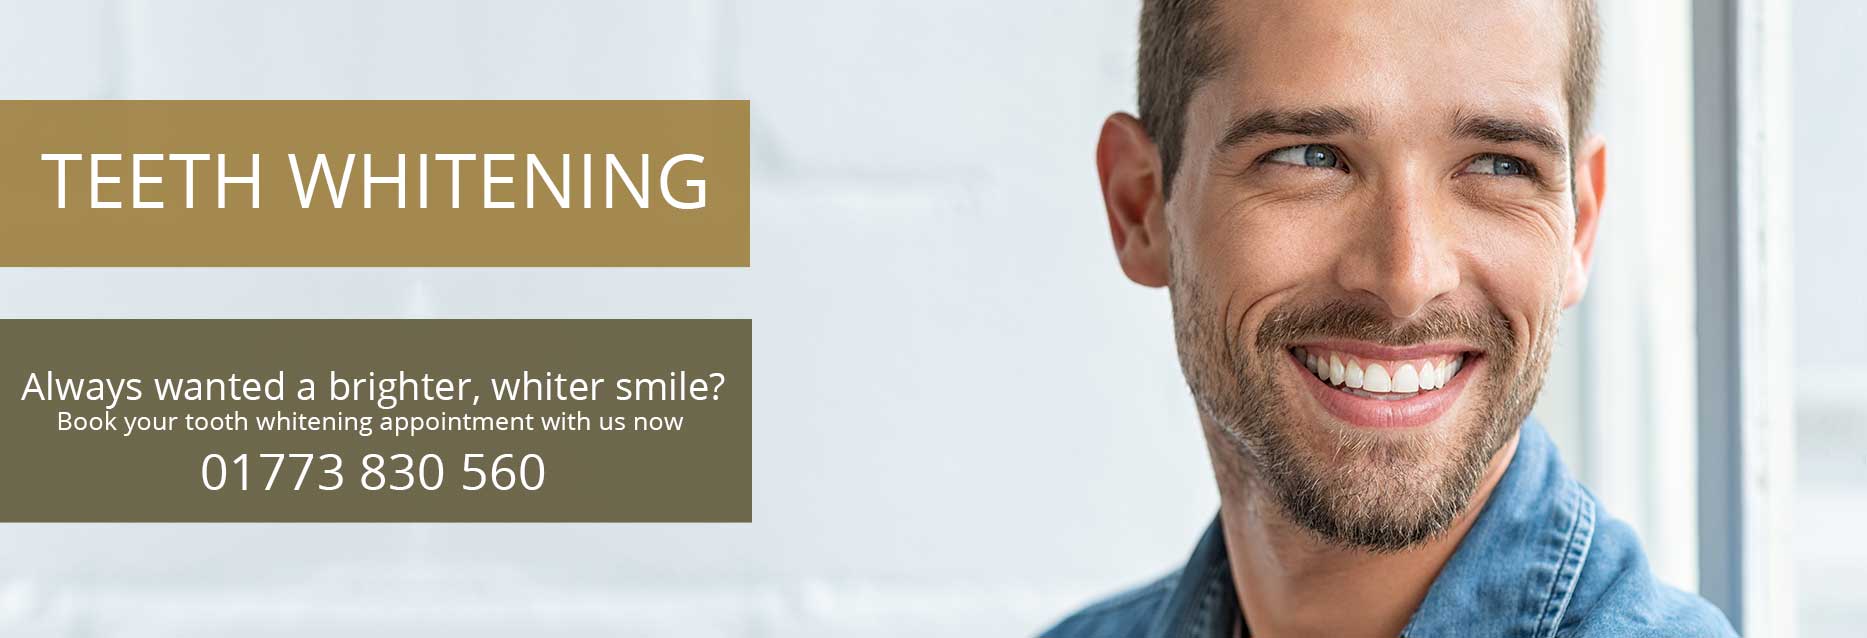 teeth whitening at refine specialist dental care